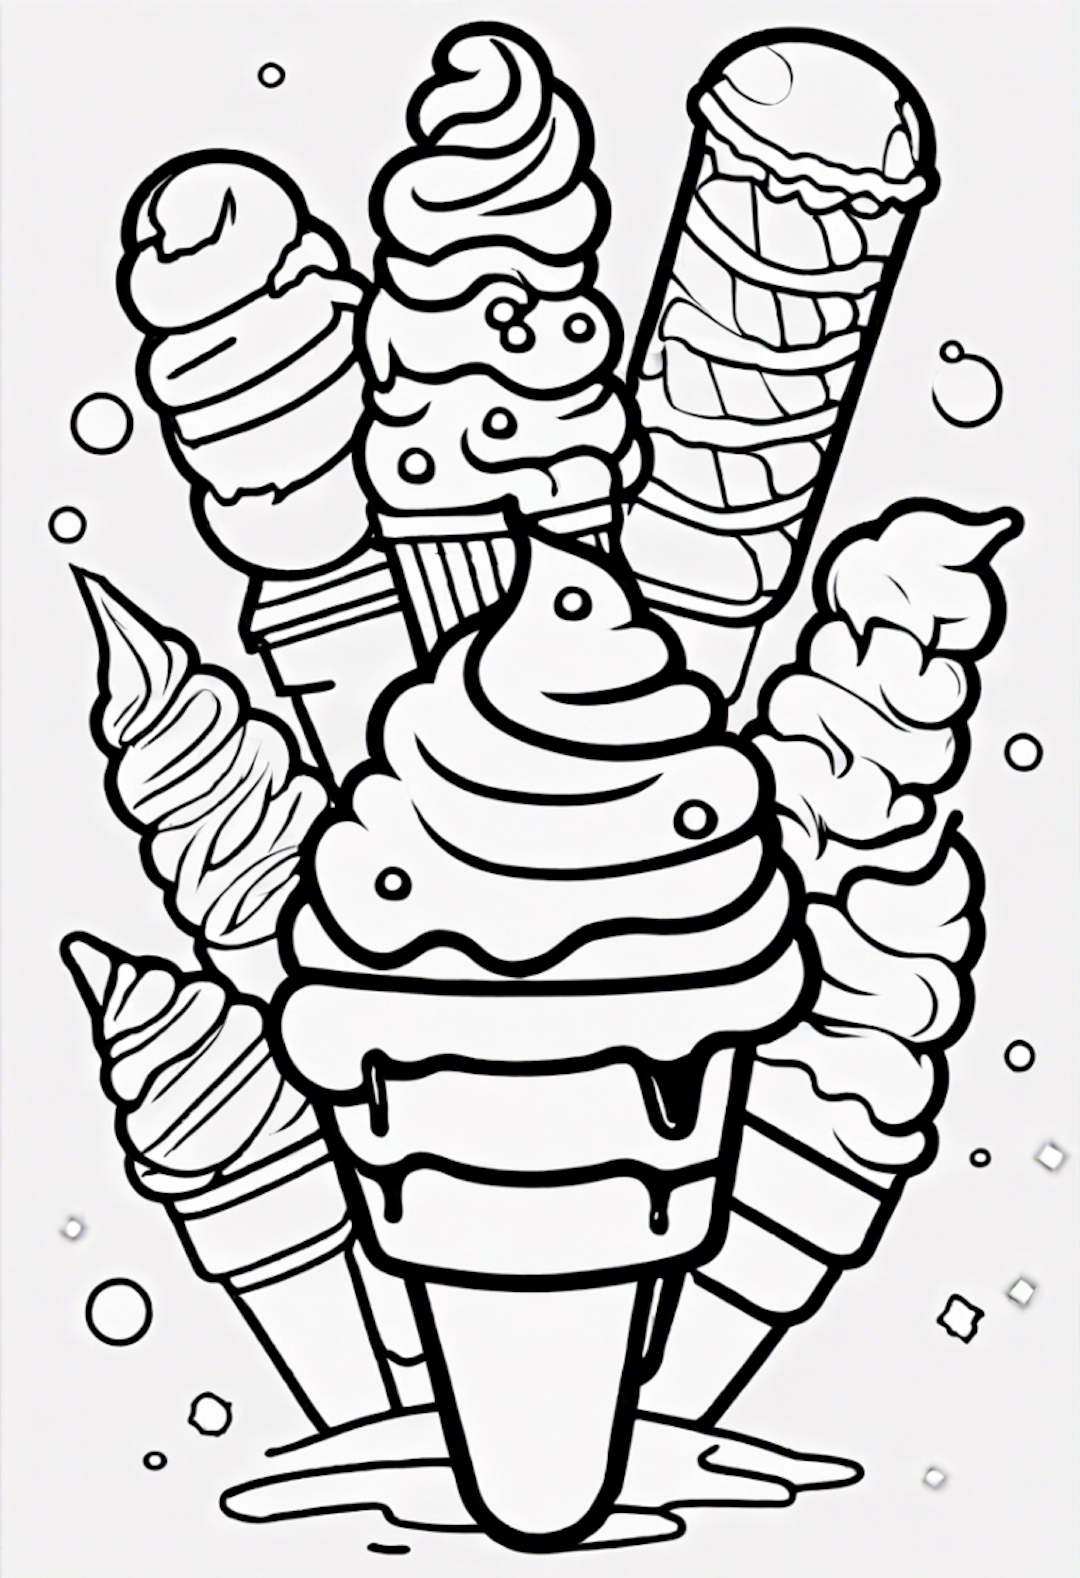 Ice Cream Delights Coloring Page coloring pages